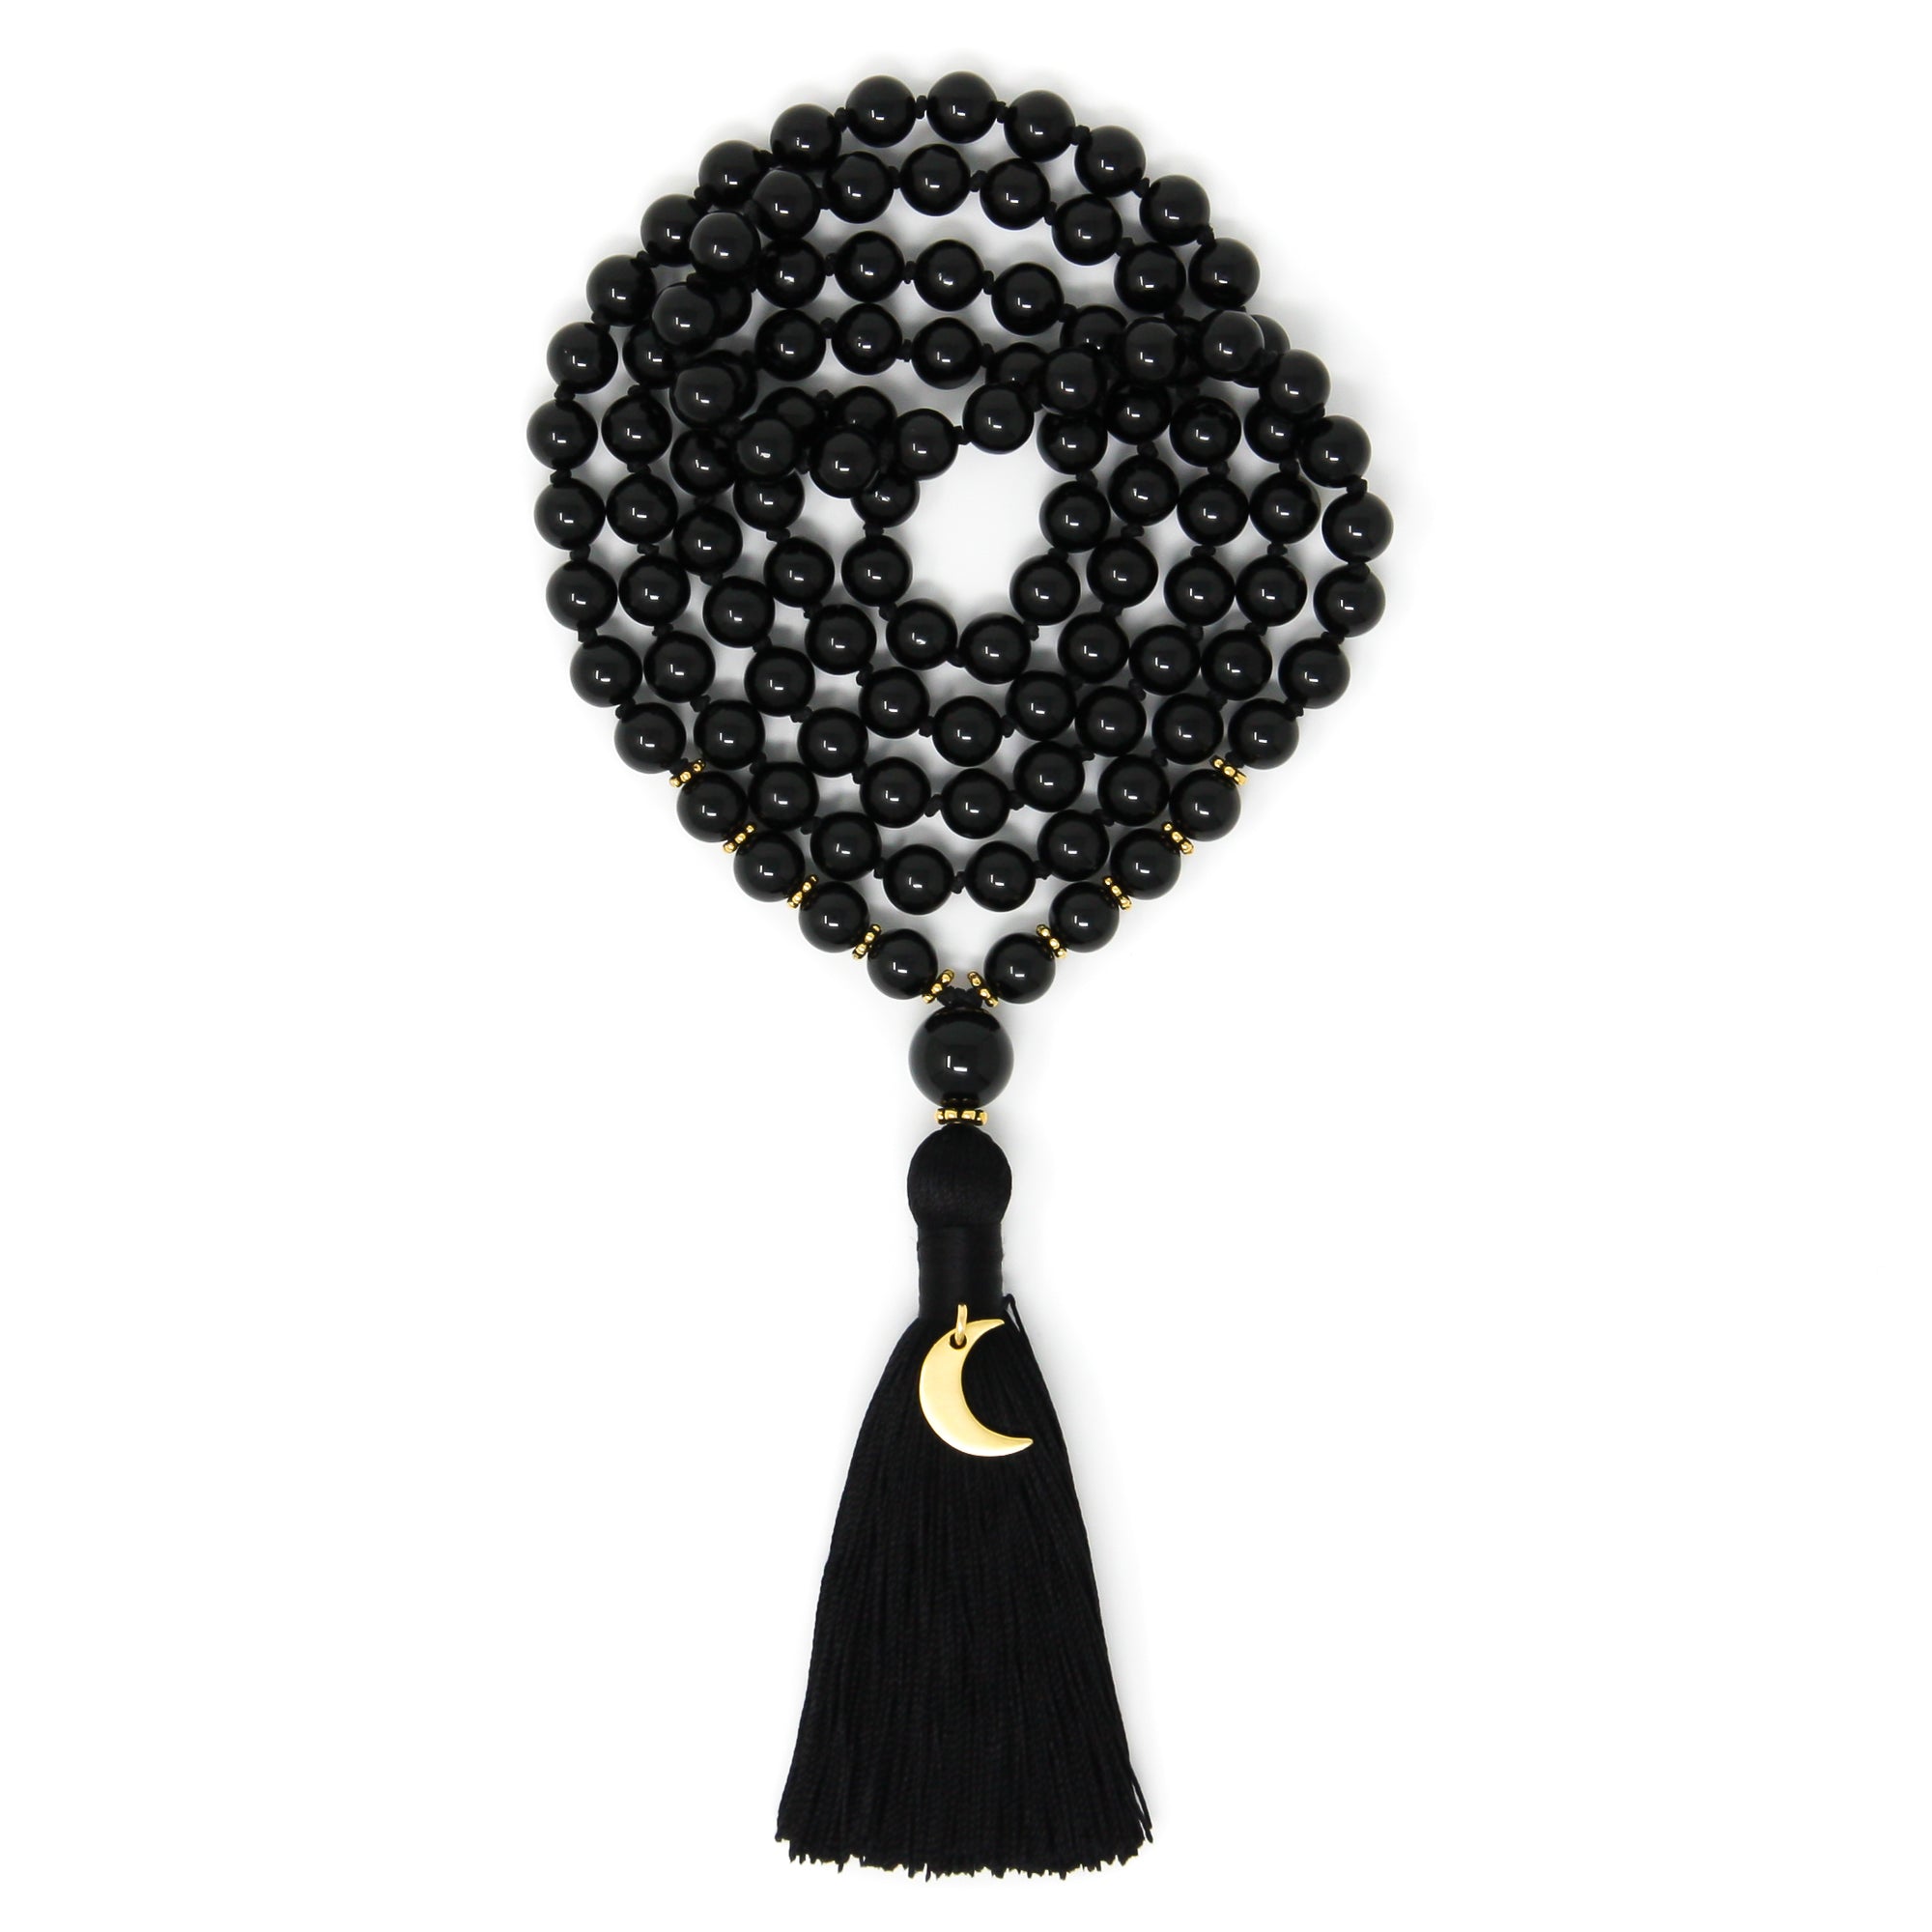 Black Tourmaline Mala Necklace with Gold Crescent Moon, crystal healing jewelry